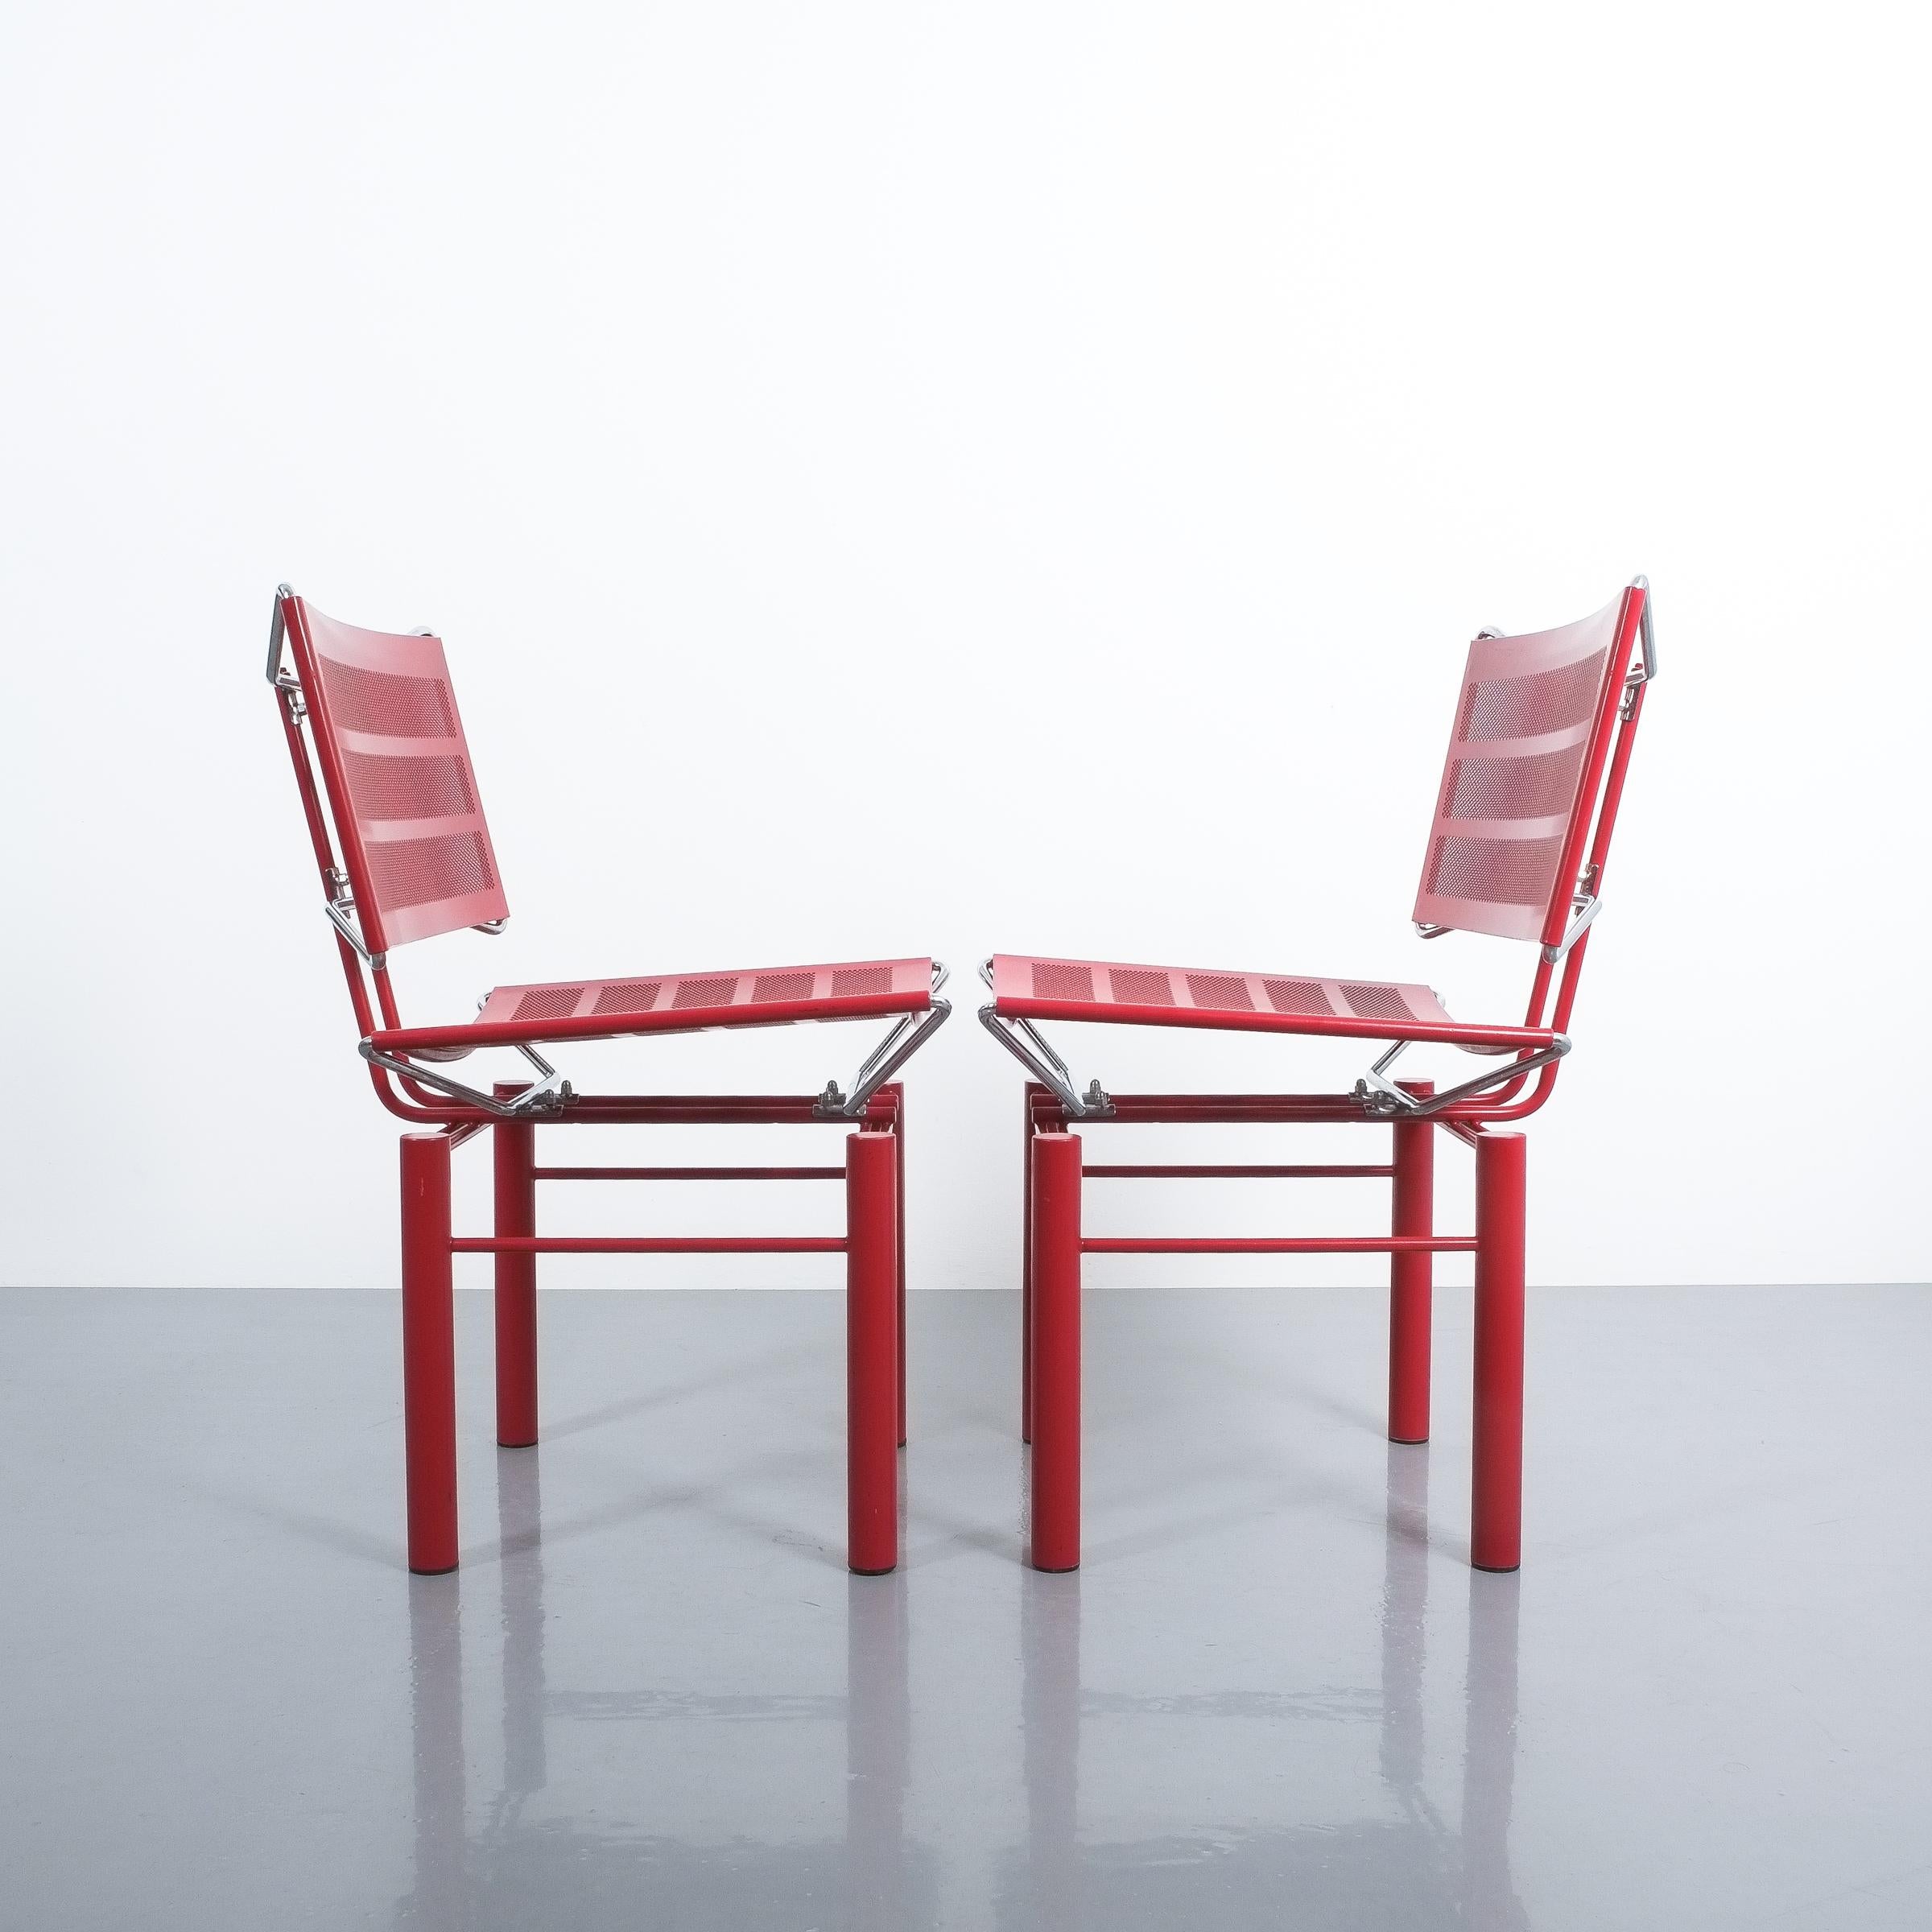 Two pairs of red Hans Ullrich Bitsch chairs Series 8600, circa 1980. Postmodern classic with perforated backrest and seat and highly delicate metal joints. Very good original condition with some minor color losses. We sell them as sets of 2. Total